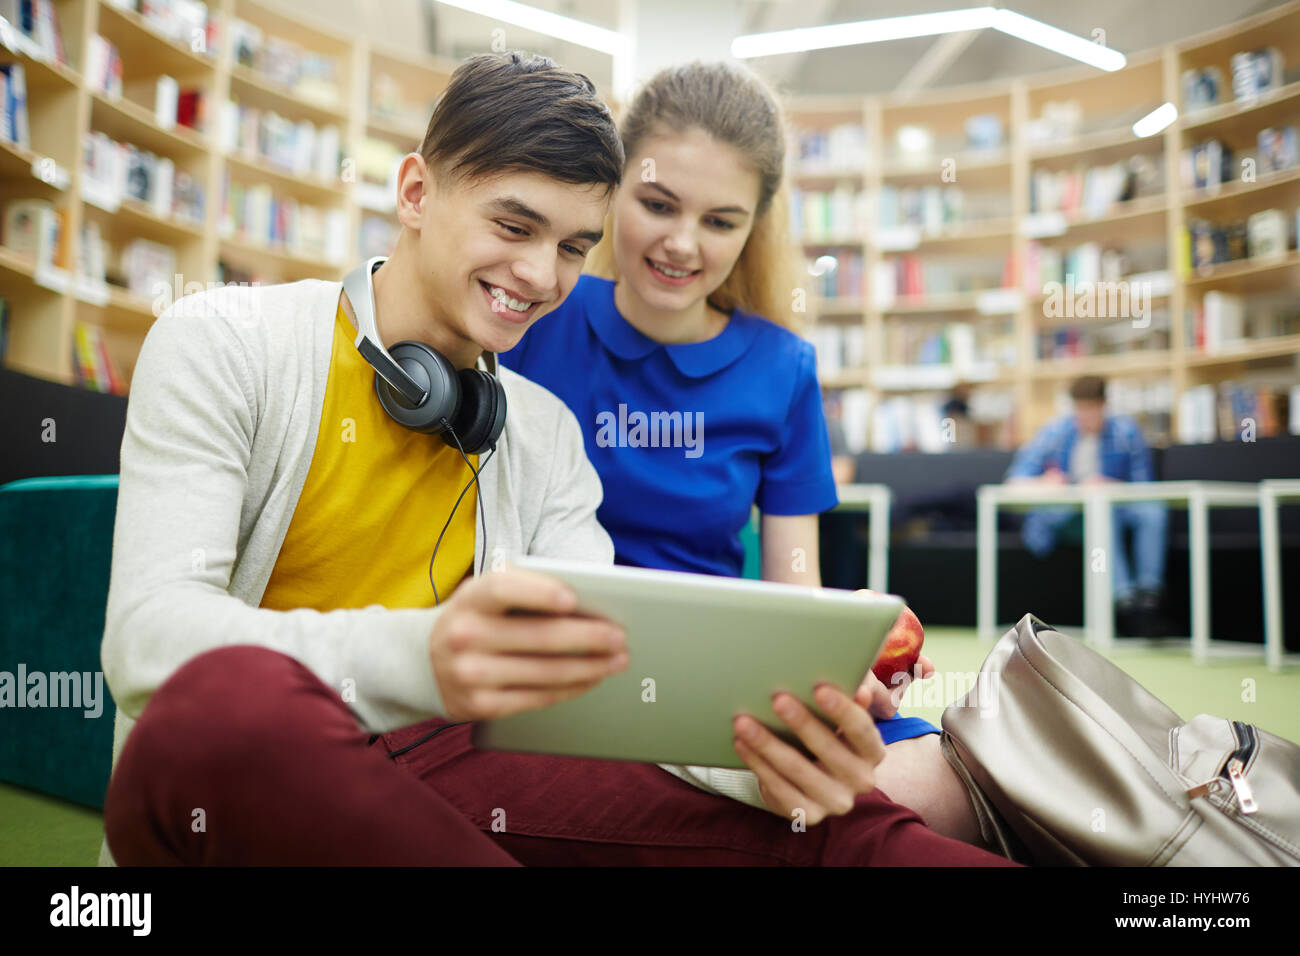 Smiling Students Using Tablet Banque D'Images